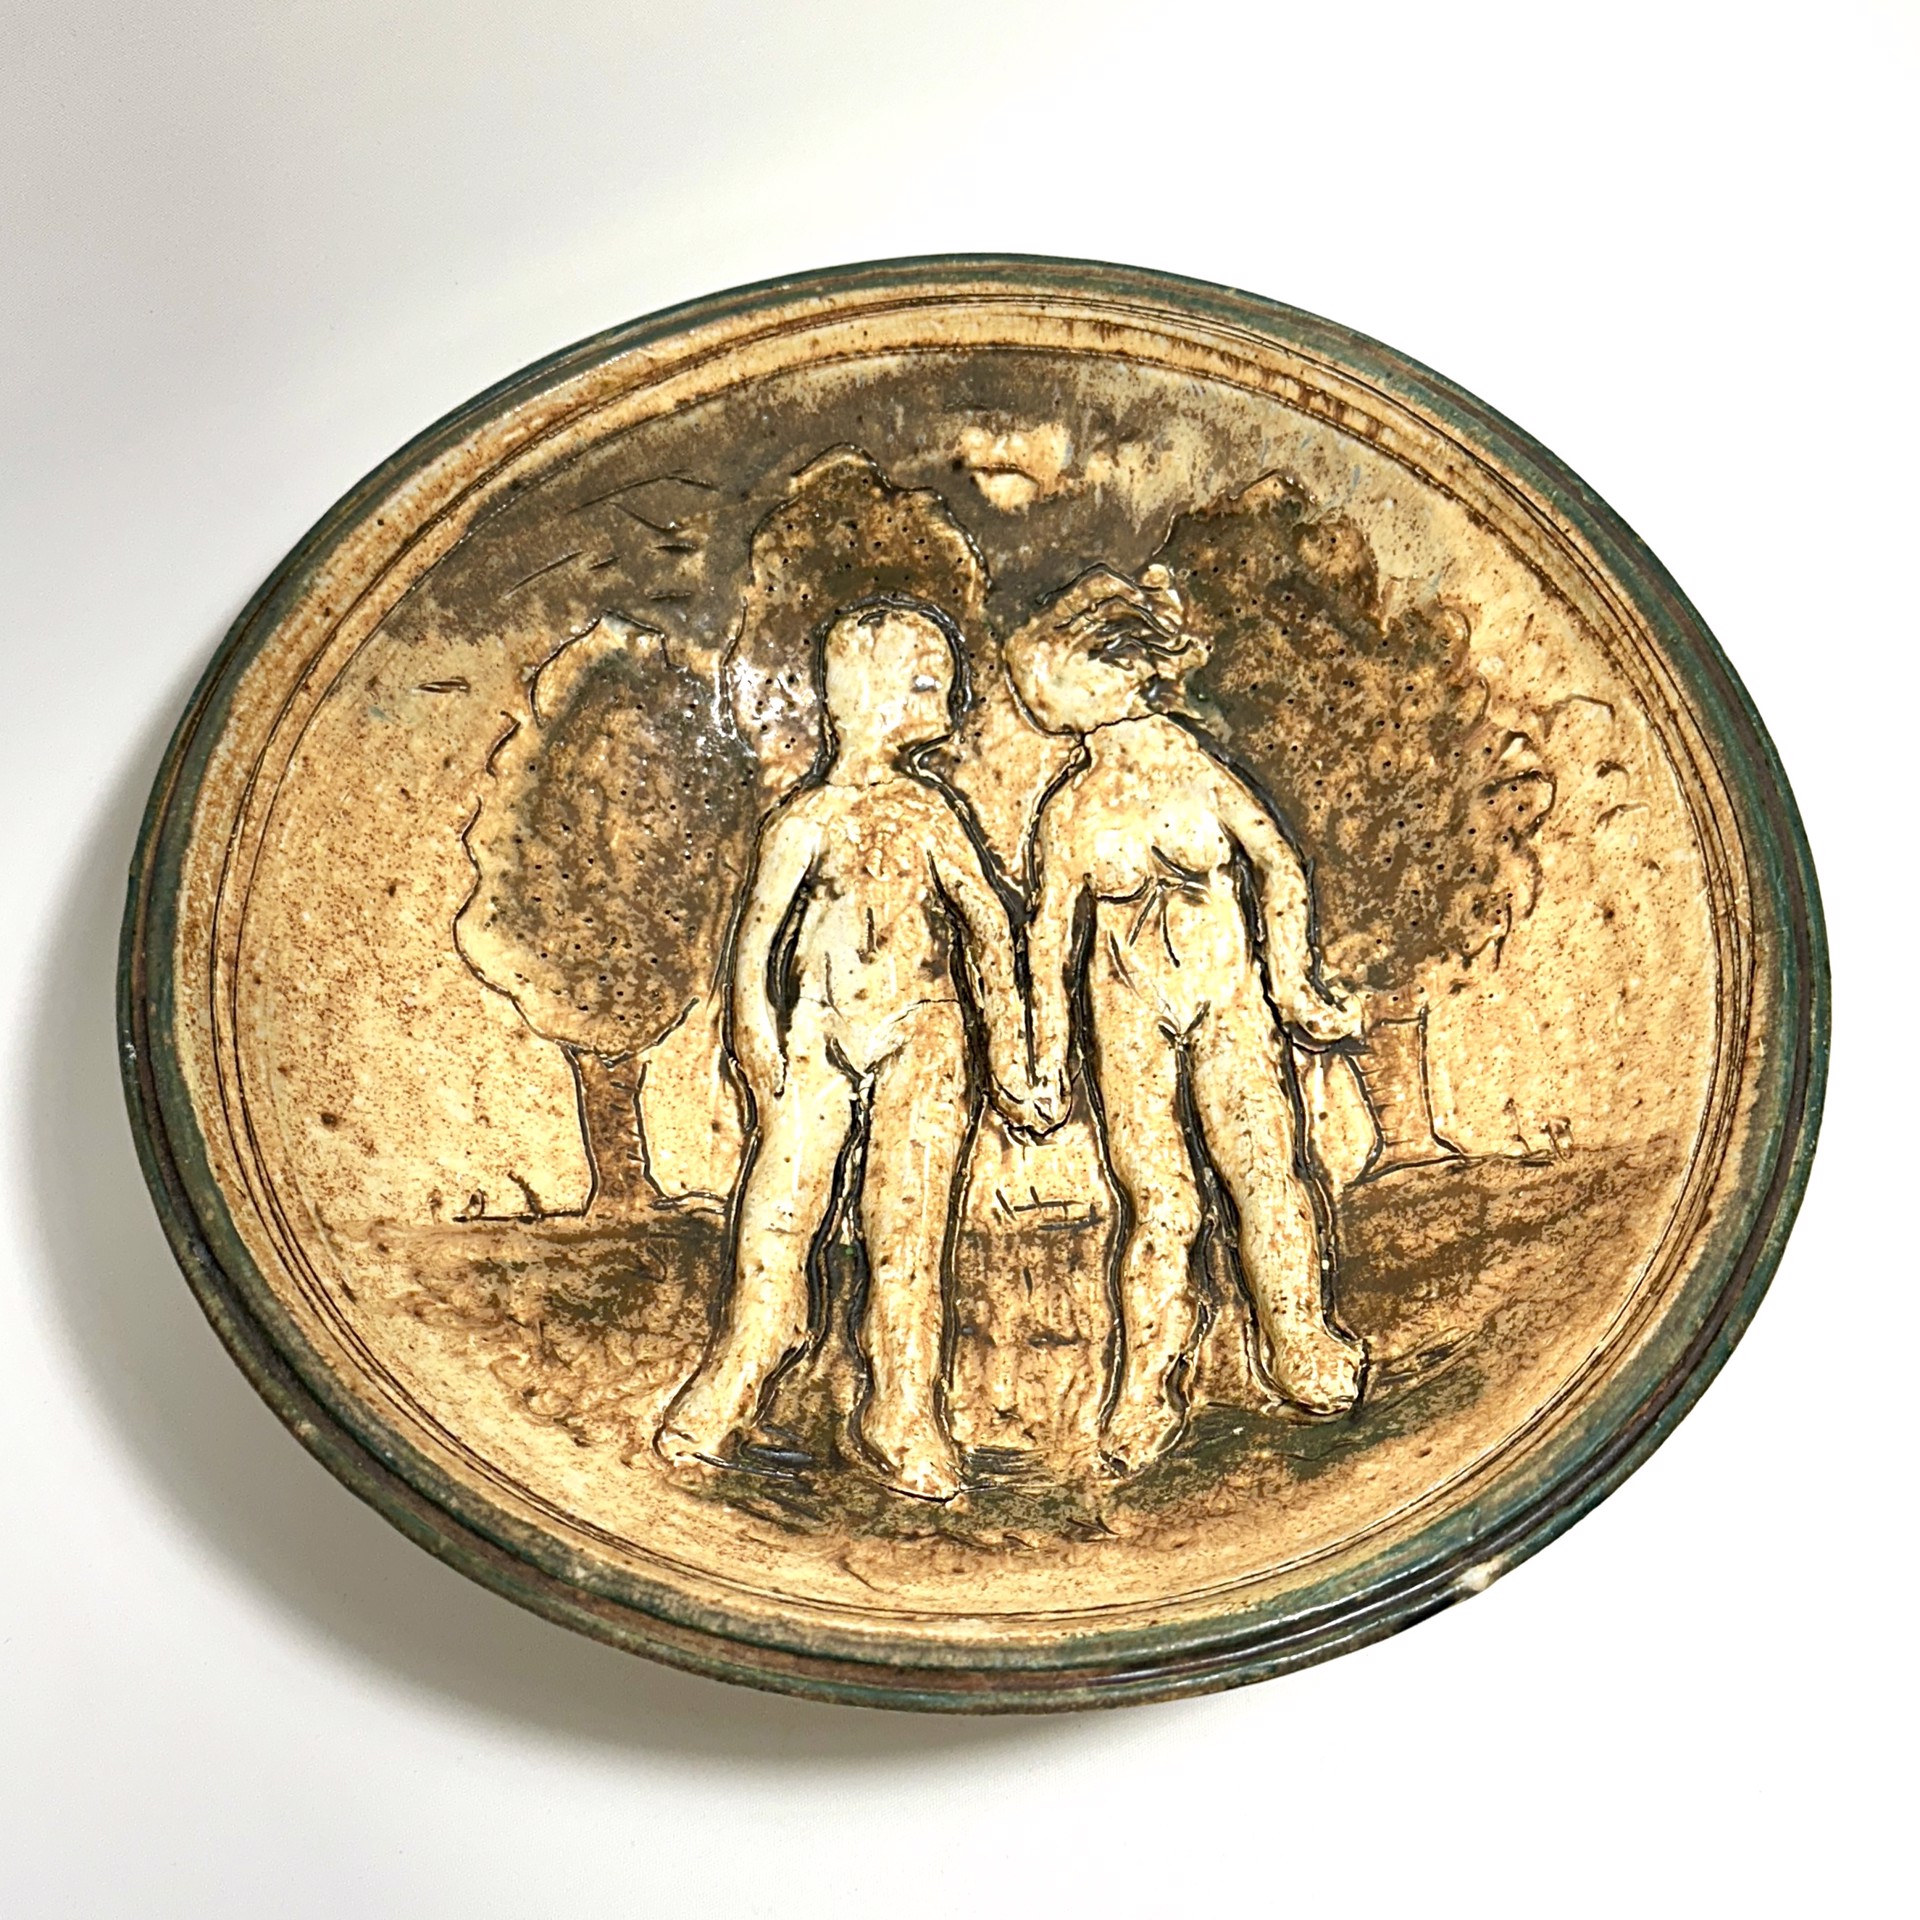 "Couple Bowl" by Julius Forzano by Art One Resale Inventory